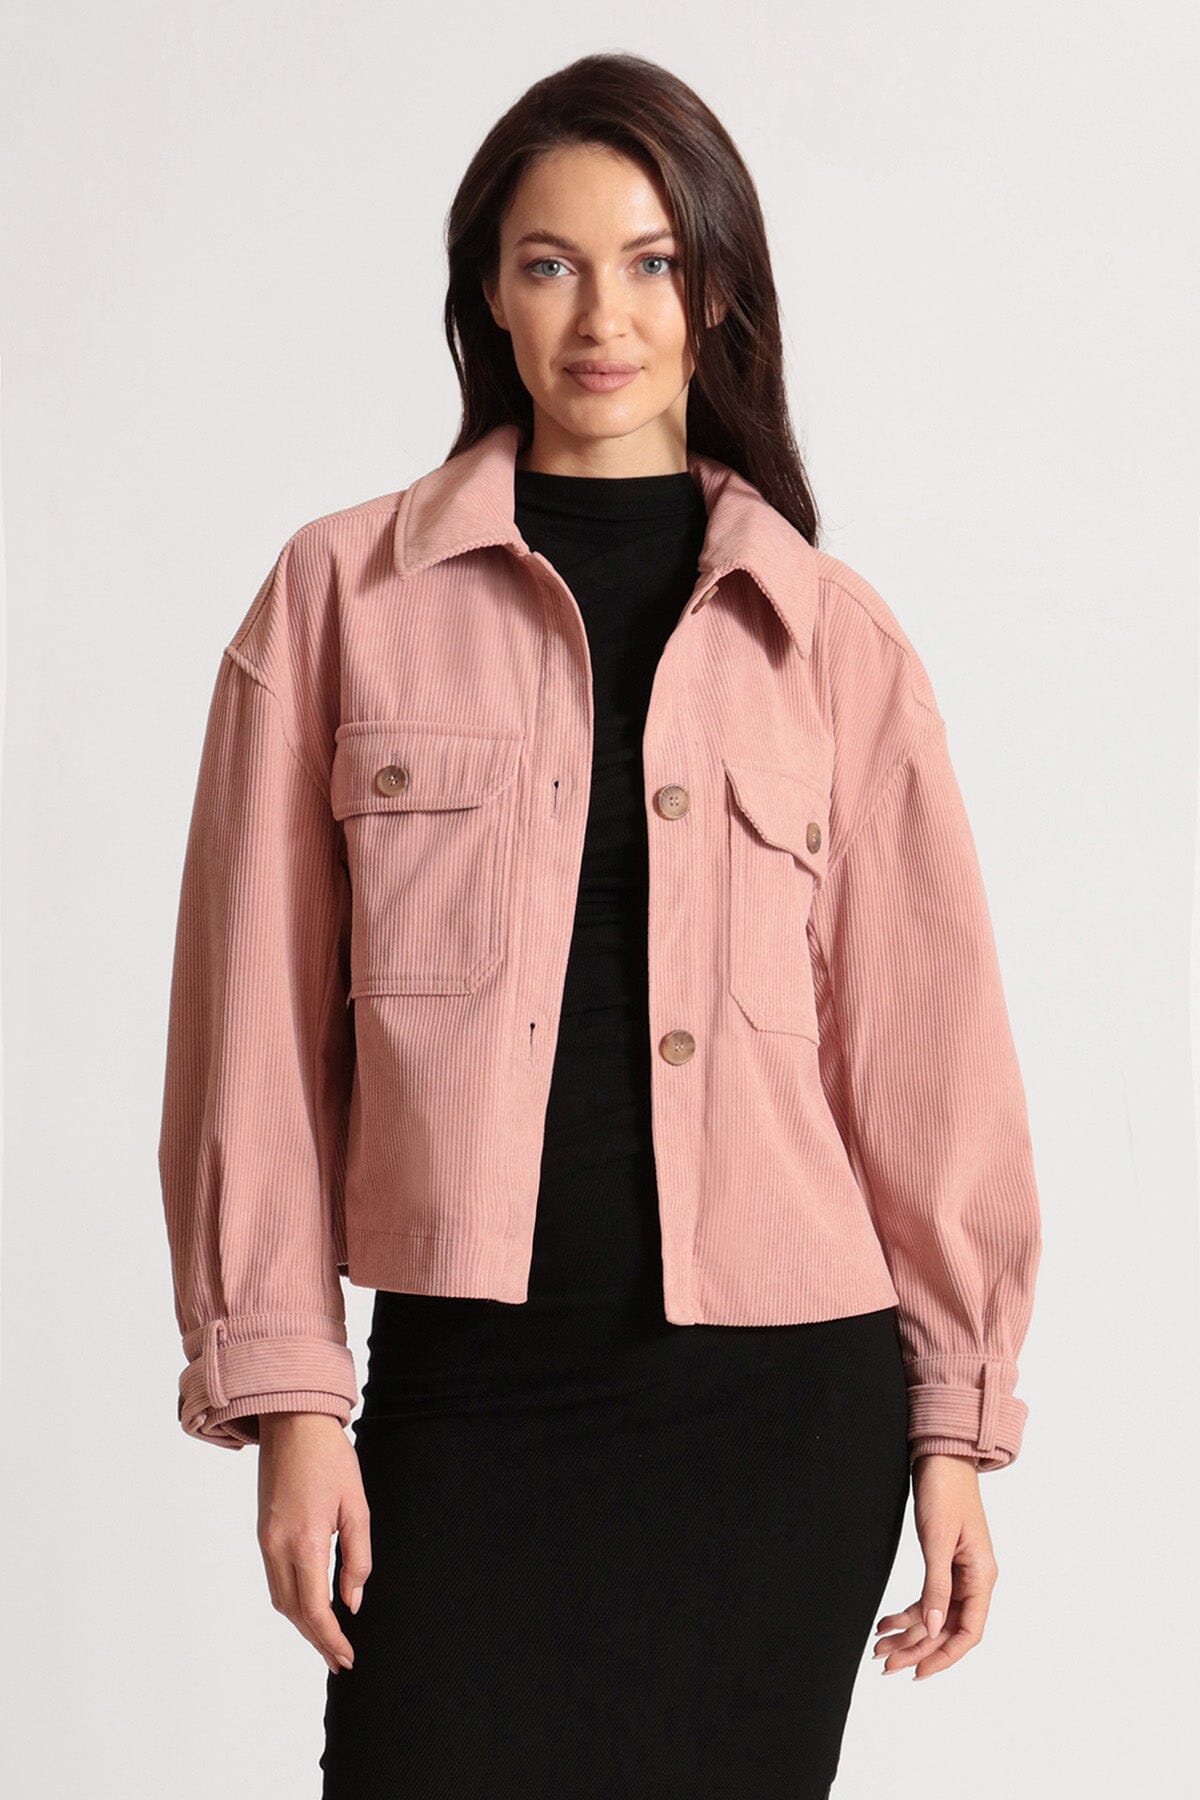 Rose pink relaxed corduroy shacket shirt jacket coat - women's figure flattering casual date night jackets shackets outerwear for Fall fashion